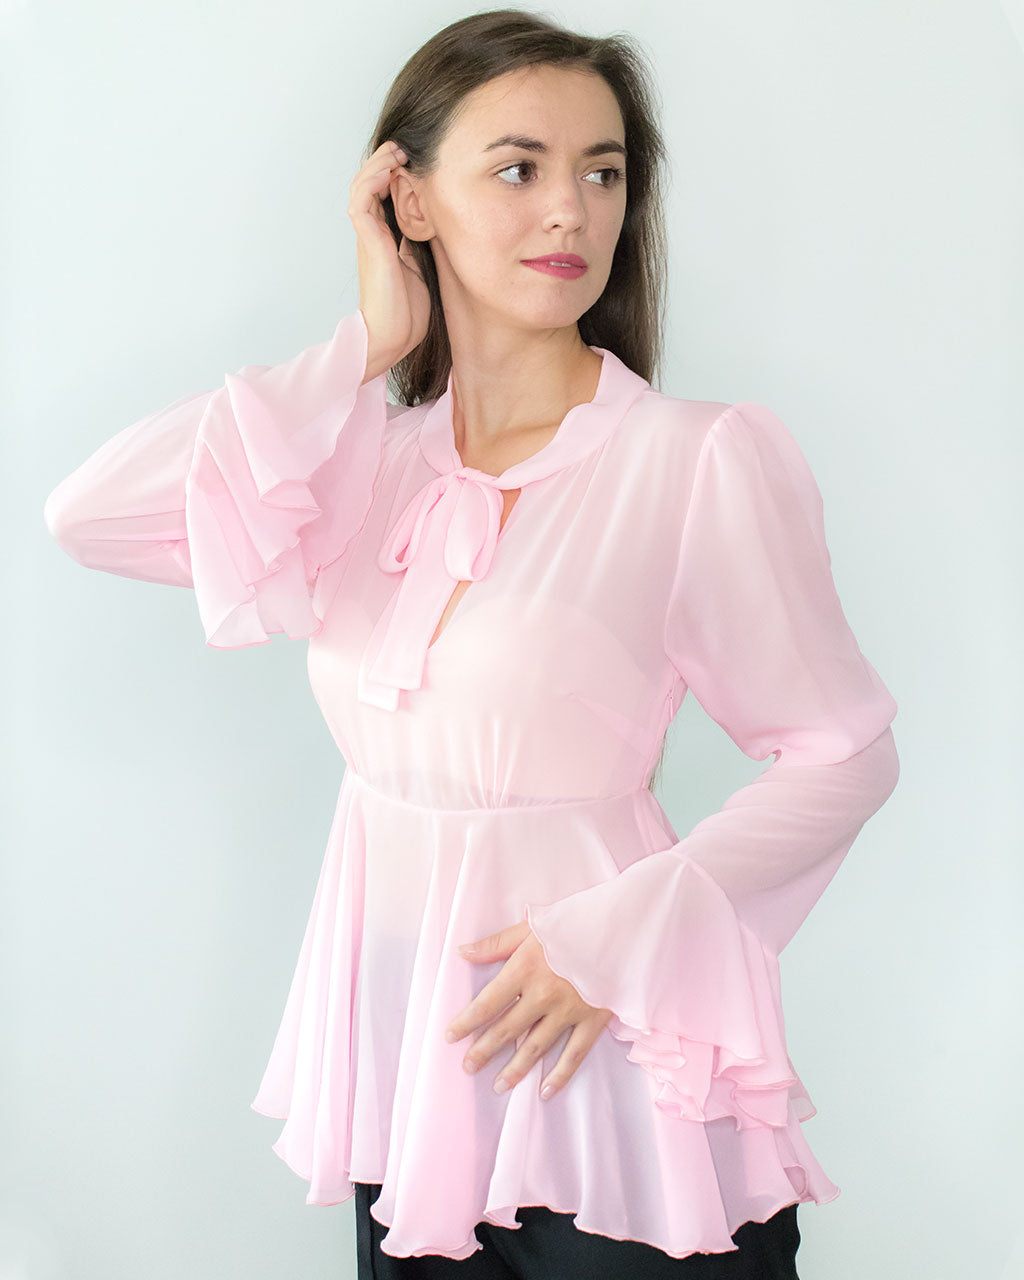 Baby pastel pink sheer smart peplum shirt Clarissa with bow and ruffles party top for ladies from RPET for spring weddings